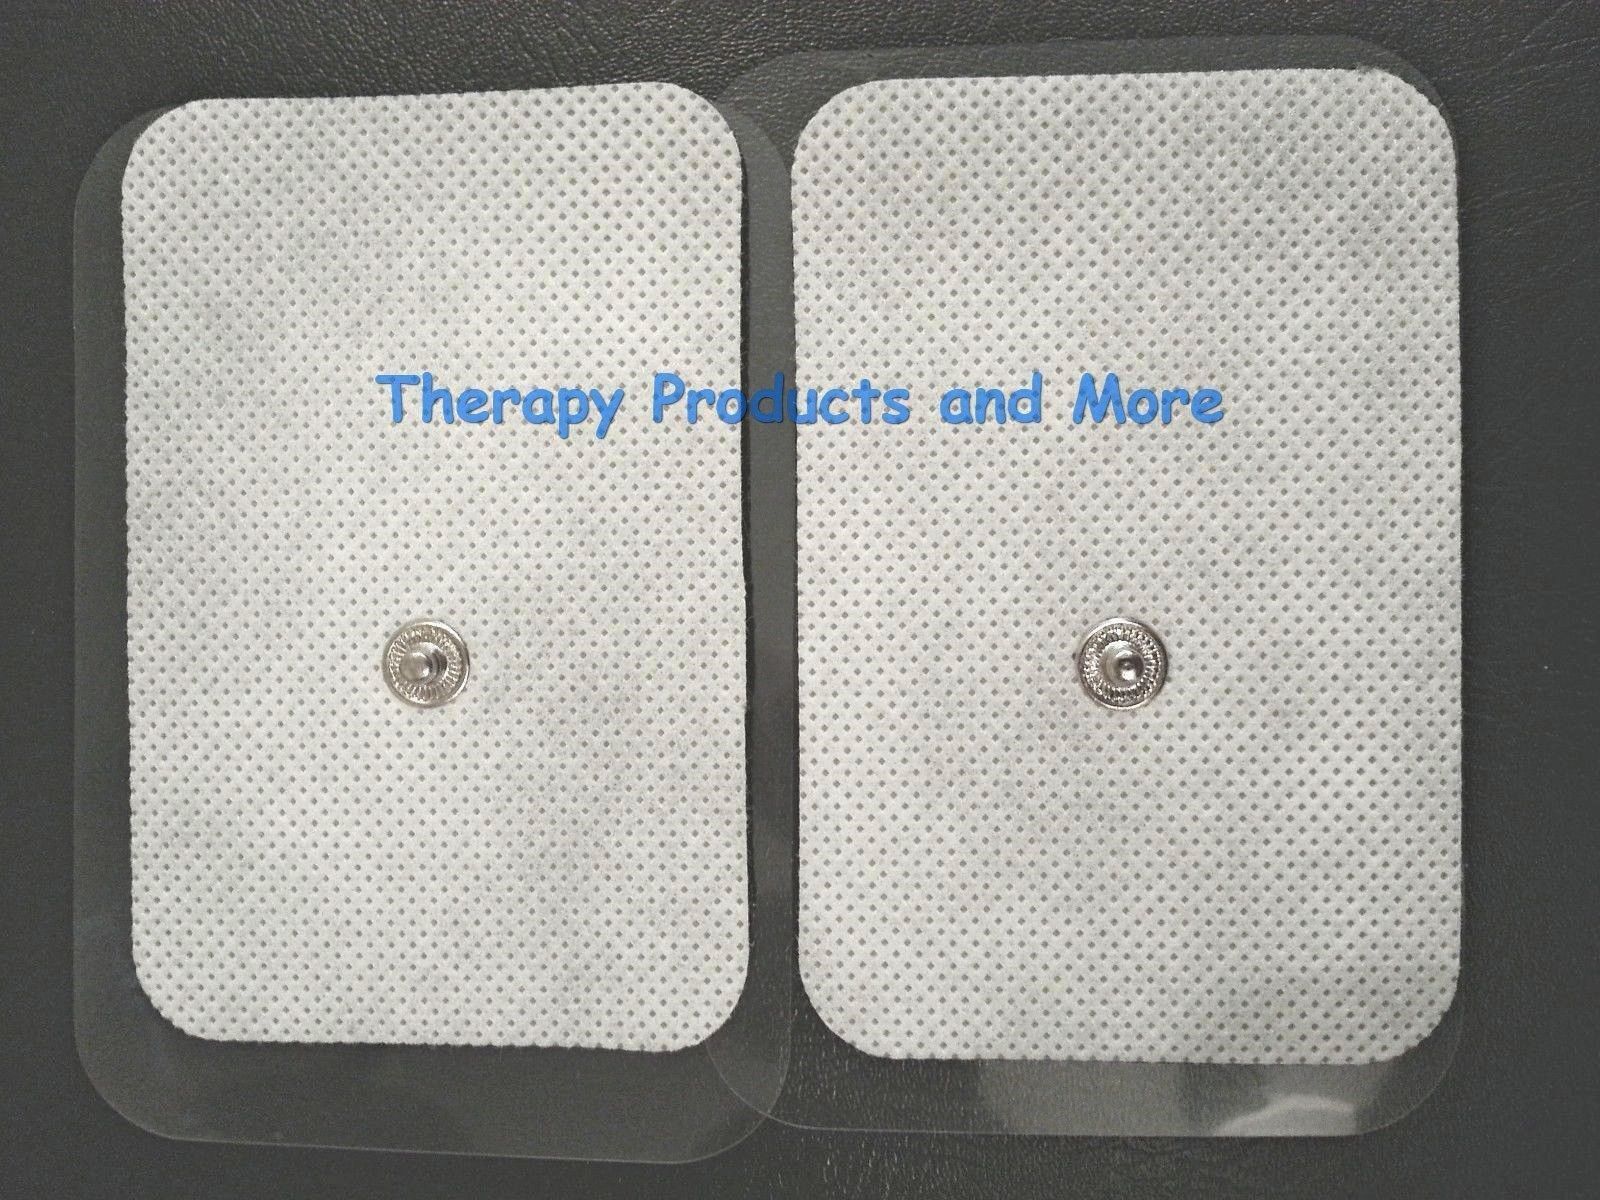 XL WIDE ELECTRODE REPLACEMENT MASSAGE PADS (4) (3.5" X 2.3") FOR TENS IFC NMES Unbranded does not apply